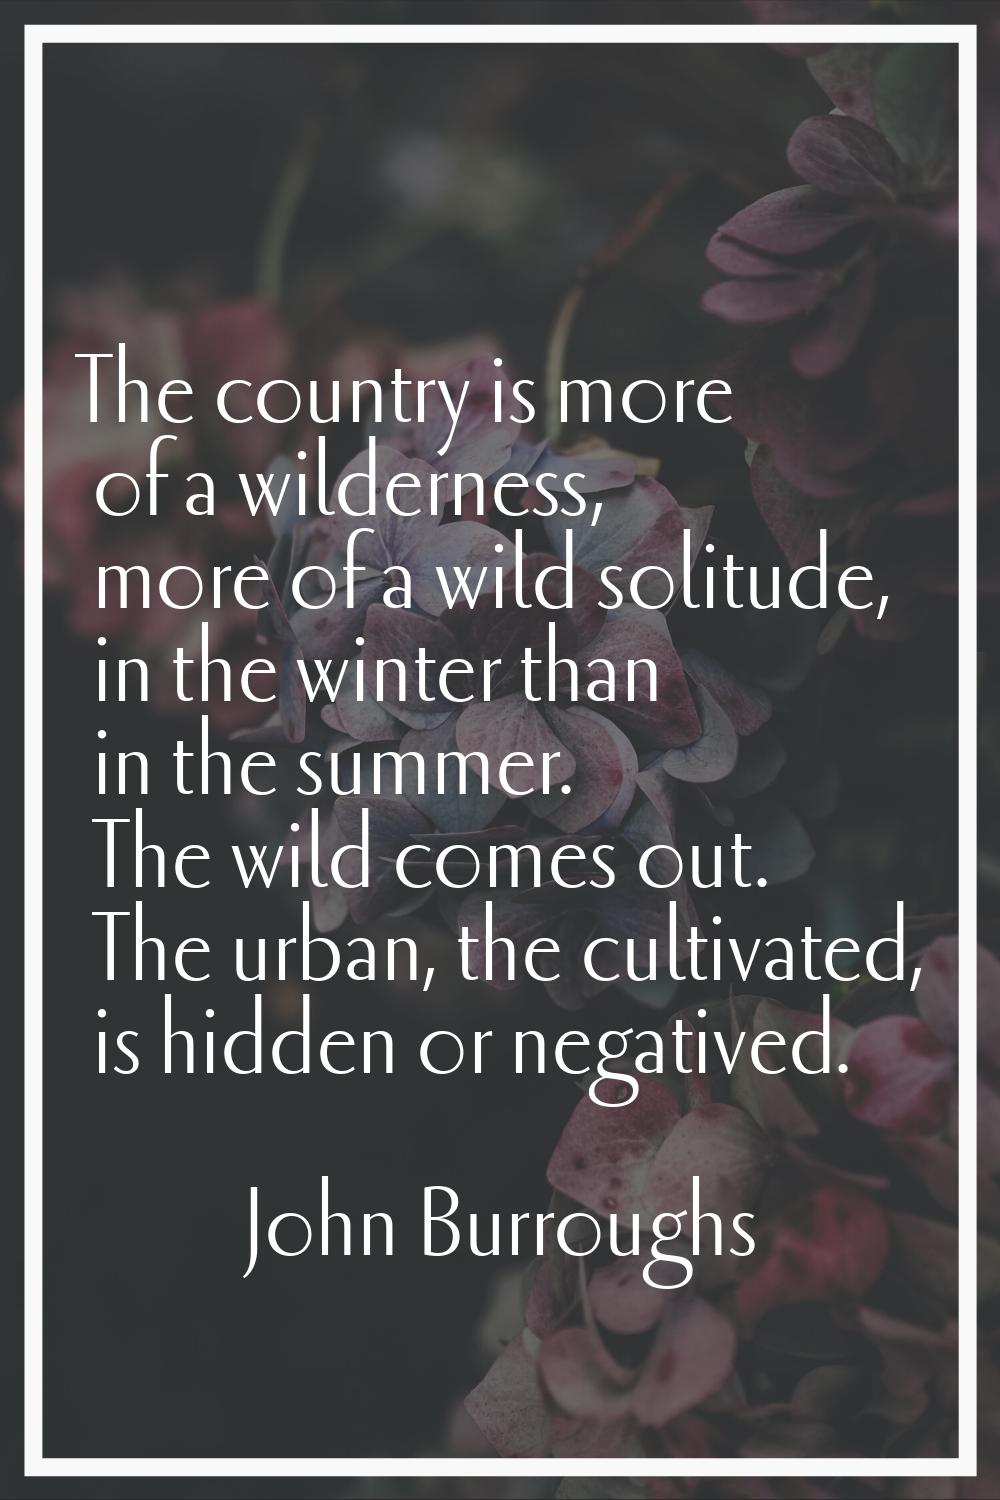 The country is more of a wilderness, more of a wild solitude, in the winter than in the summer. The